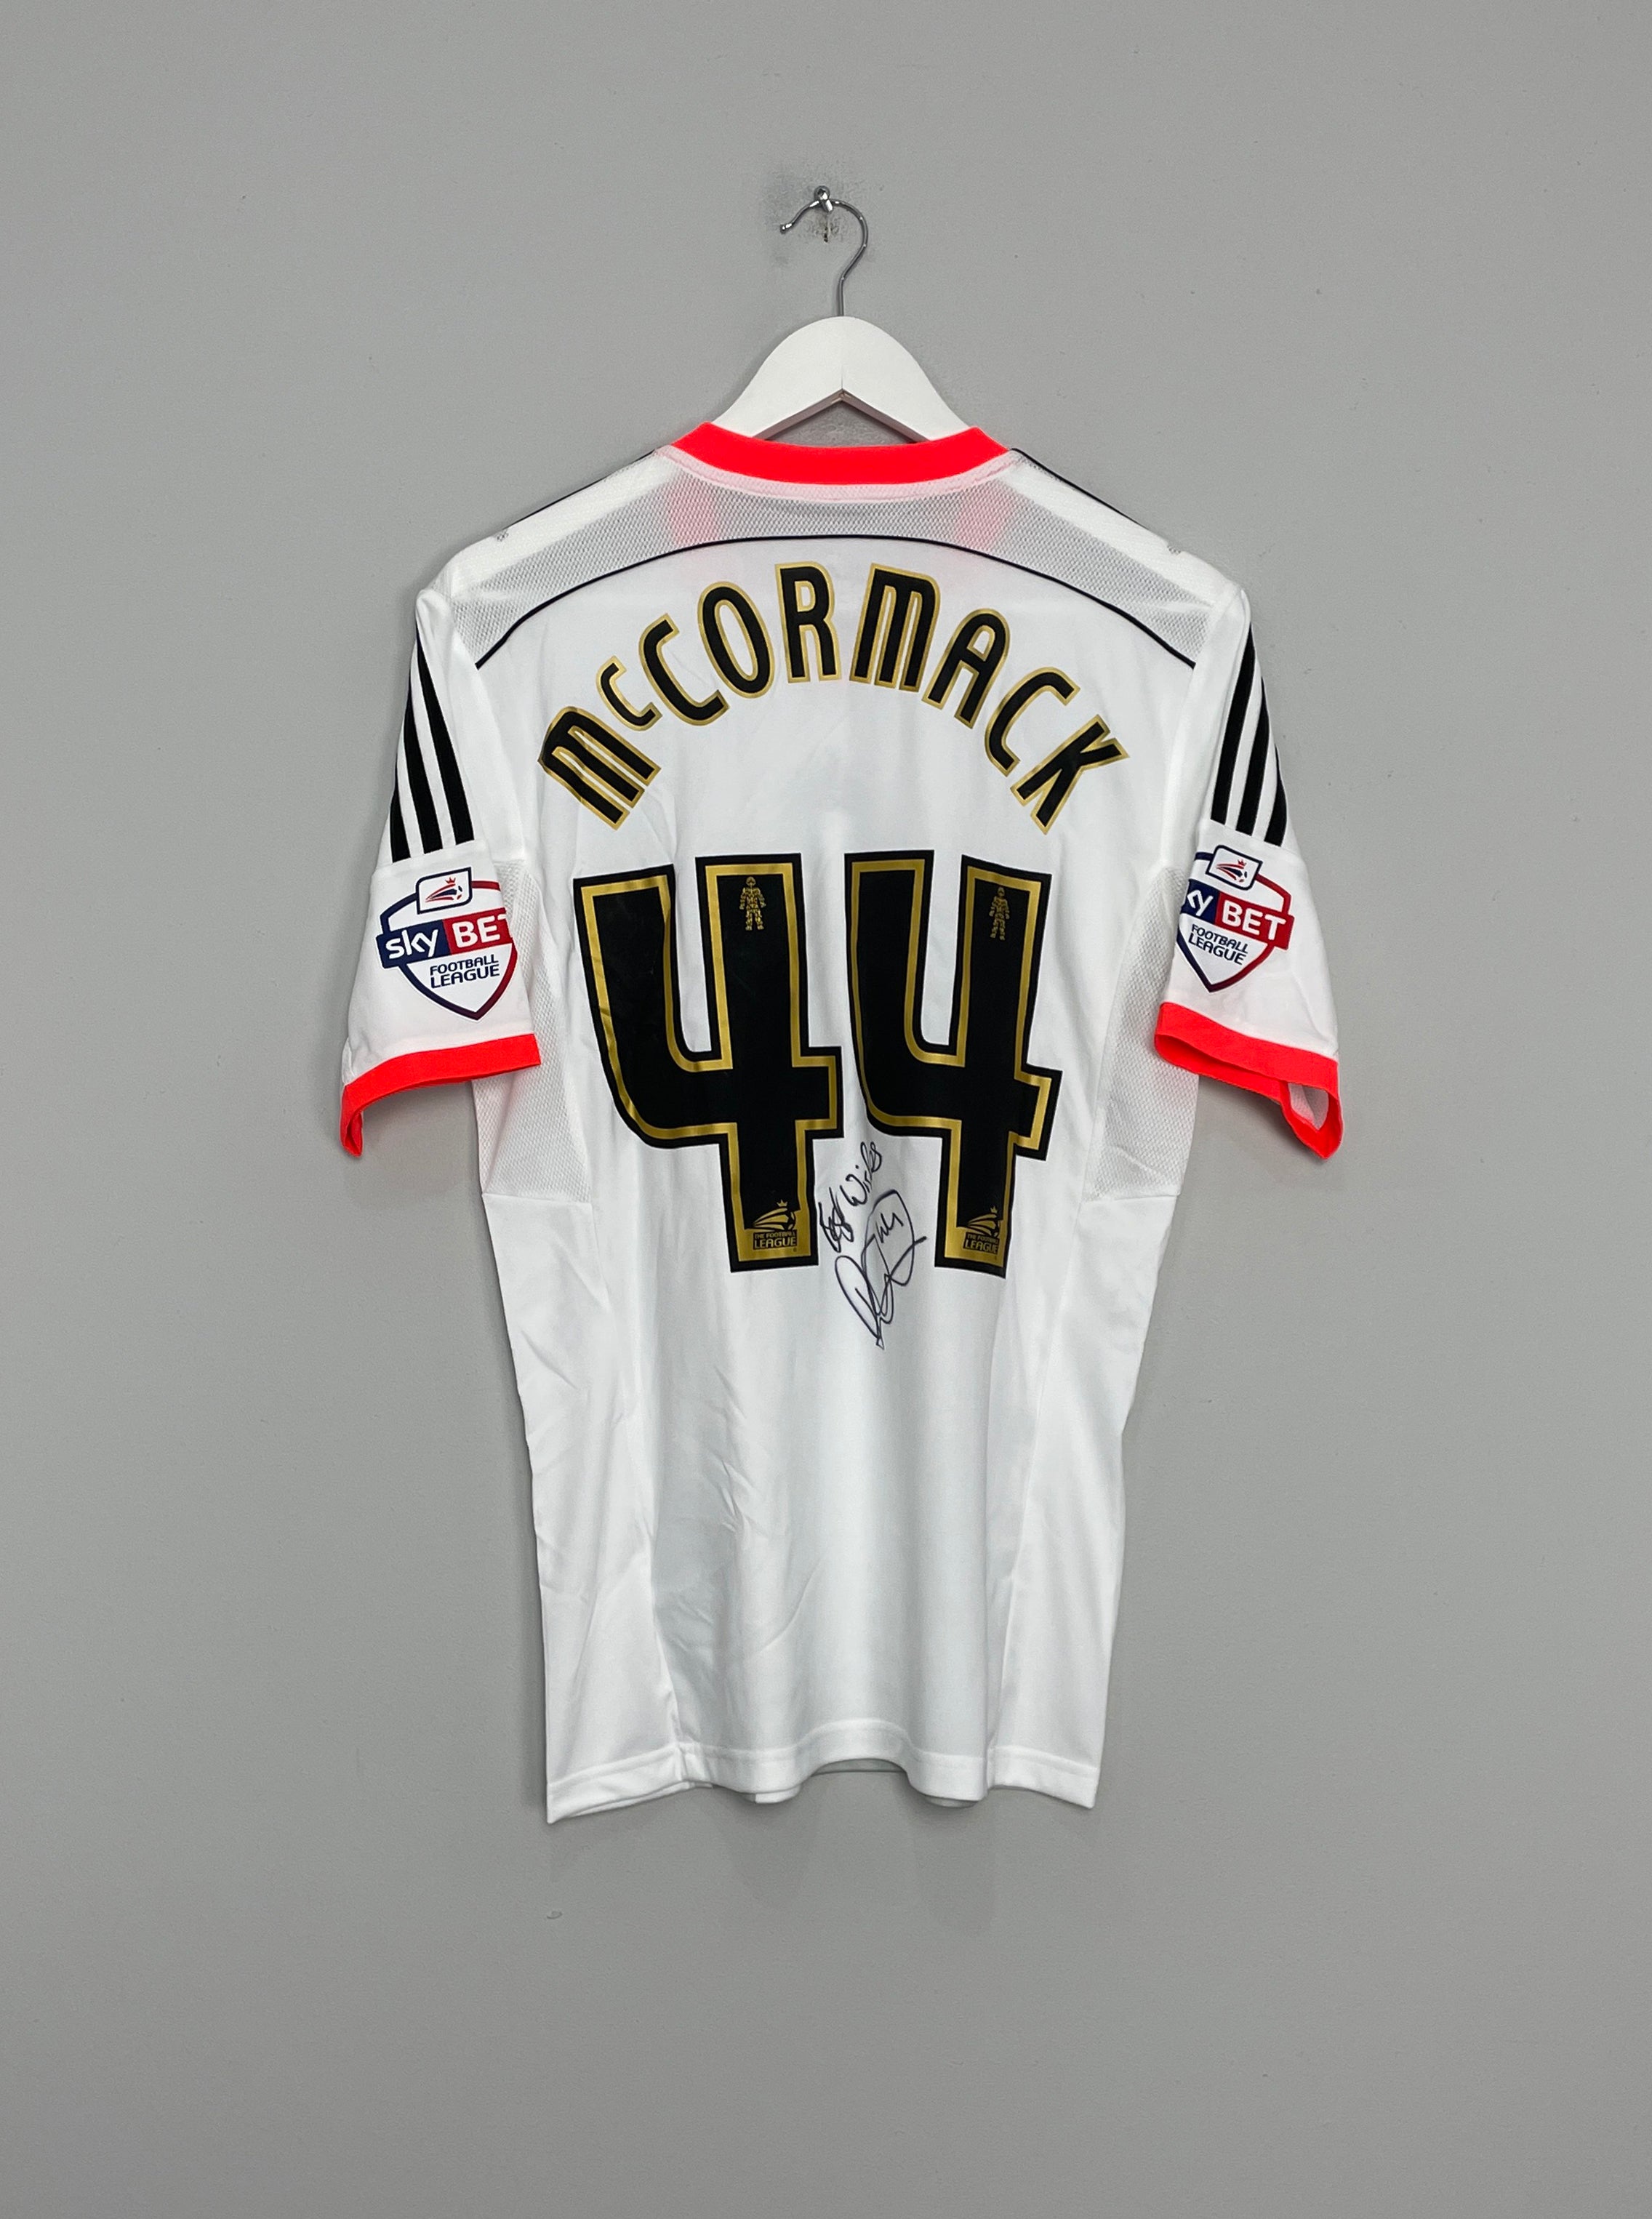 2014/15 FULHAM MCCORMACK #44 *MATCH ISSUE + SIGNED* HOME SHIRT (M) ADIDAS